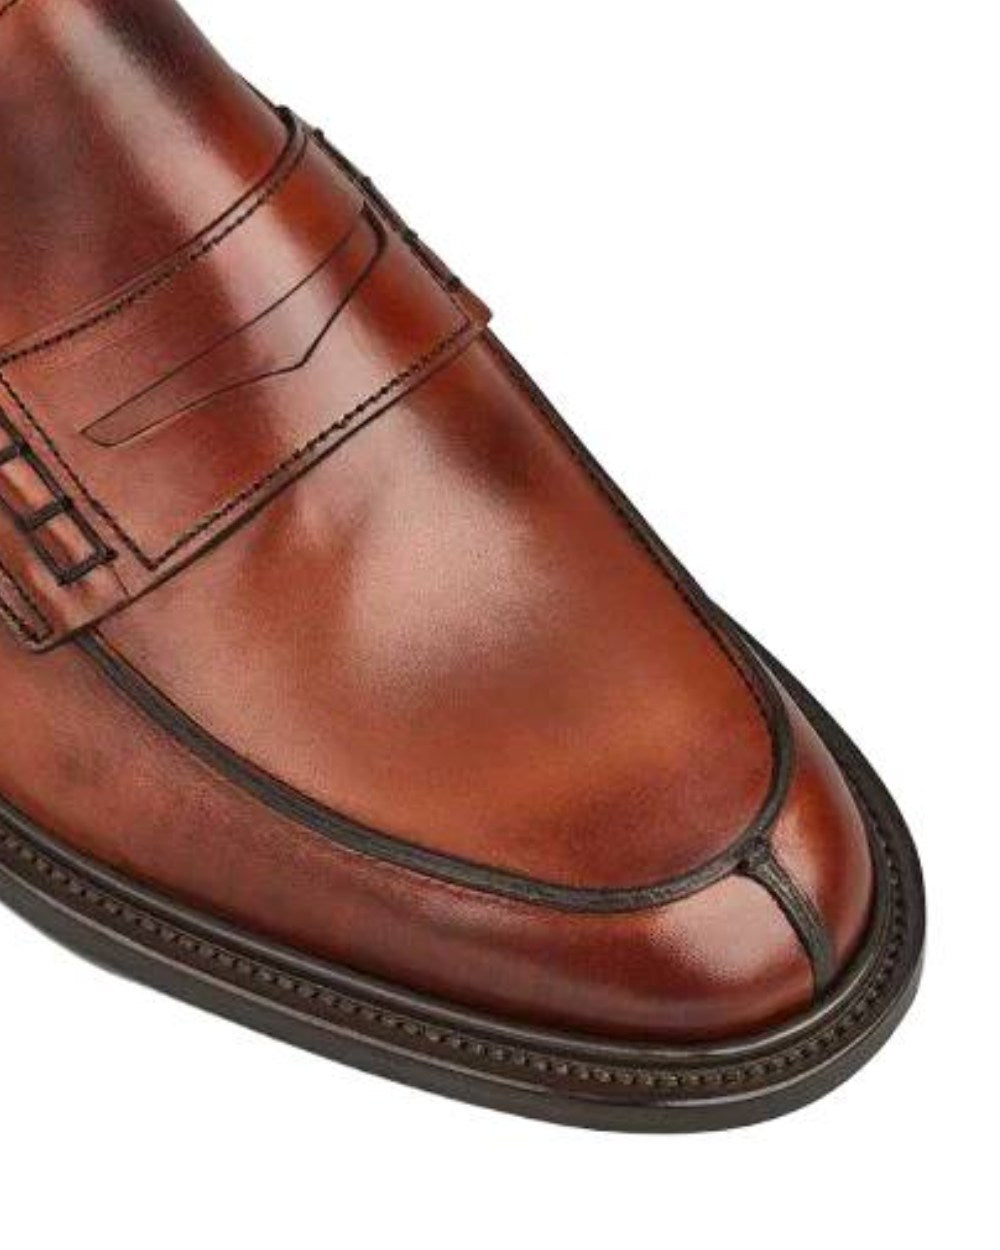 Chestnut Burnished Coloured Trickers James Leather Sole Penny Loafer On A White Background 